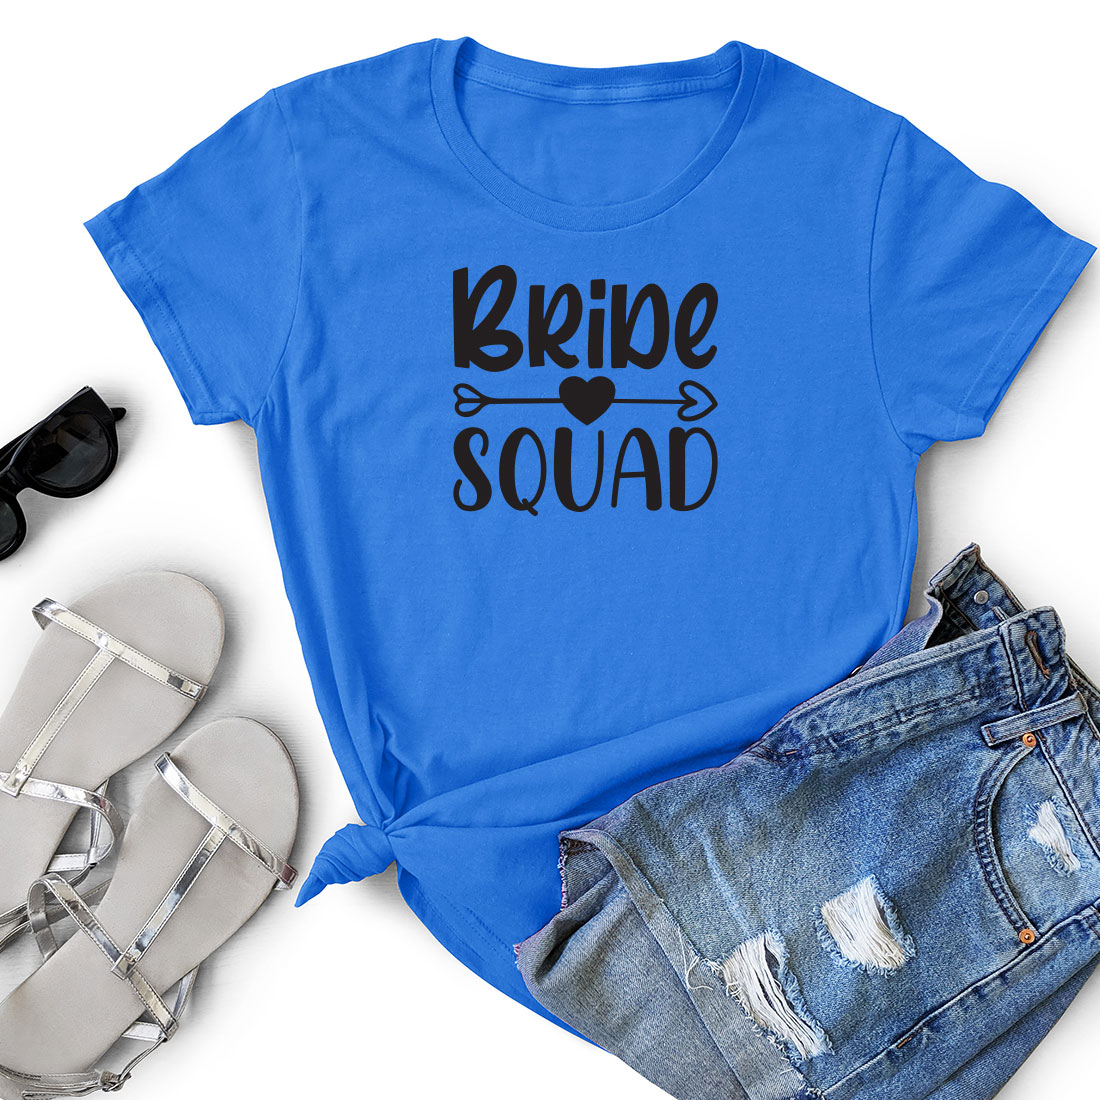 Blue shirt that says bride squad next to a pair of shorts.